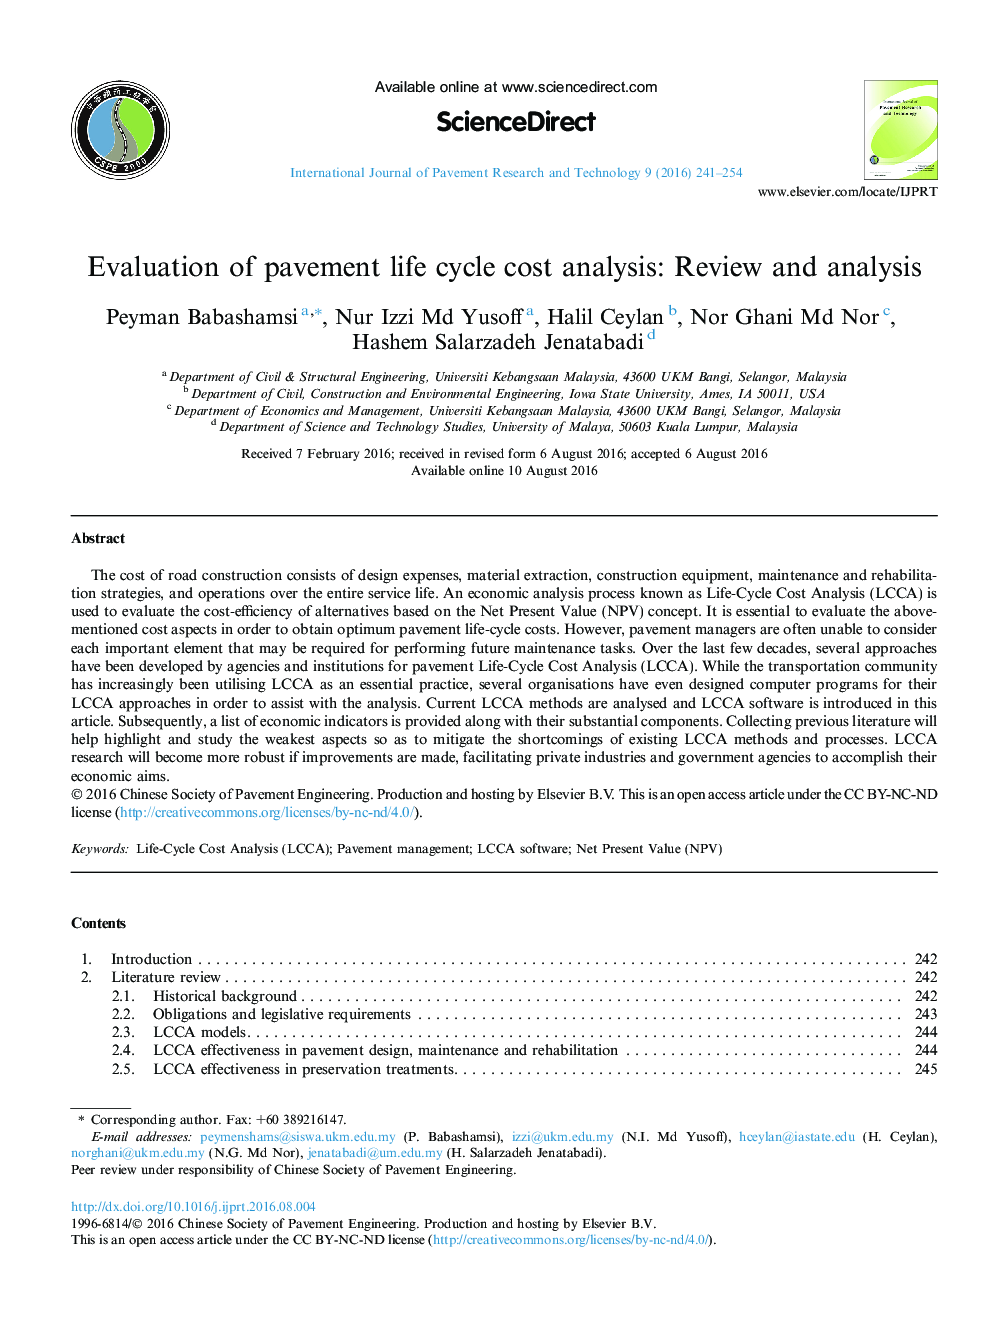 Evaluation of pavement life cycle cost analysis: Review and analysis